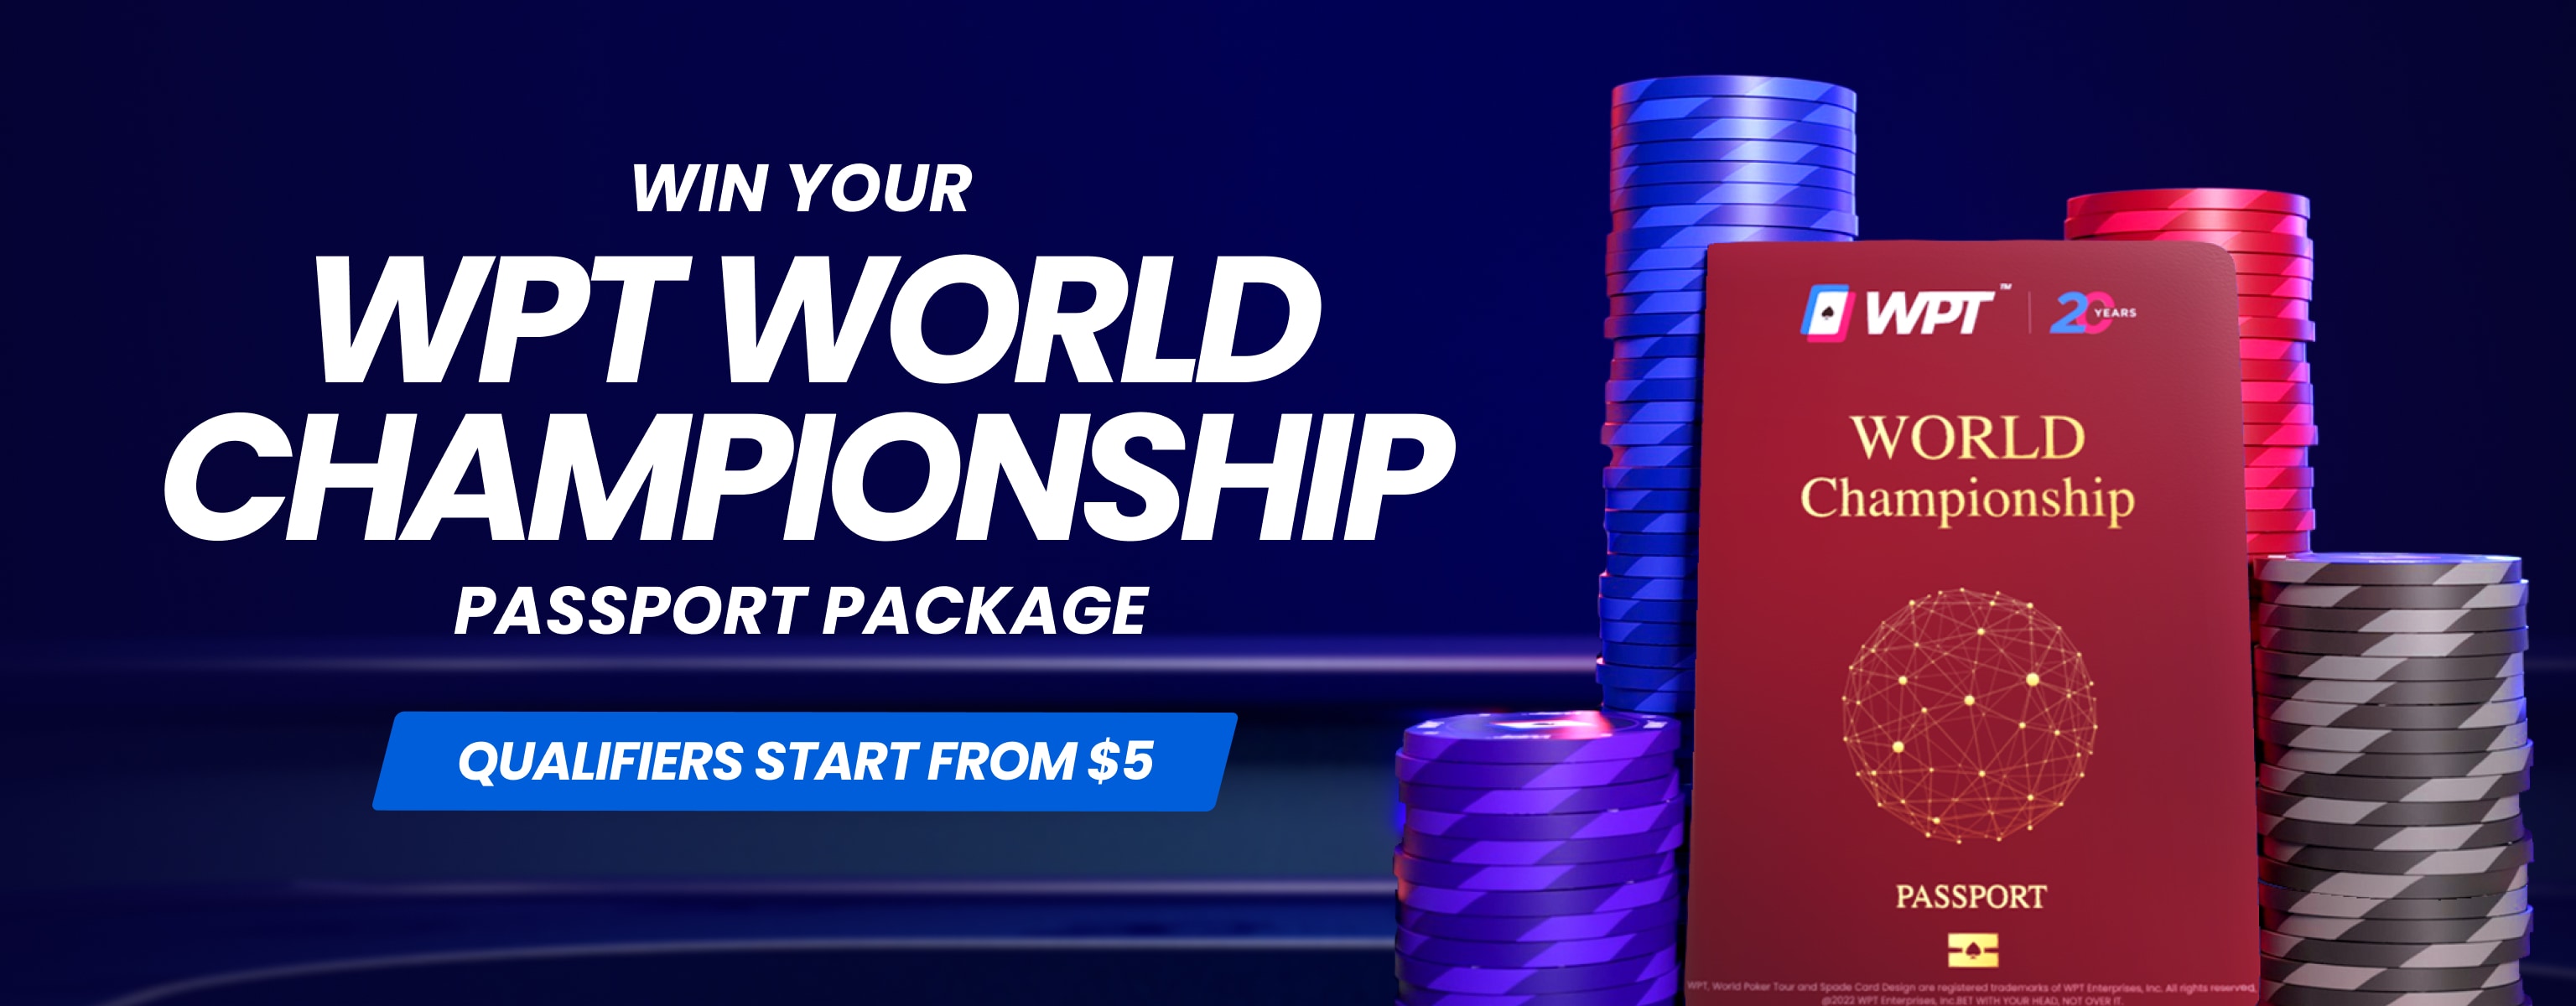 5 Gets You a Shot at the 15 Million WPT Global World Championship